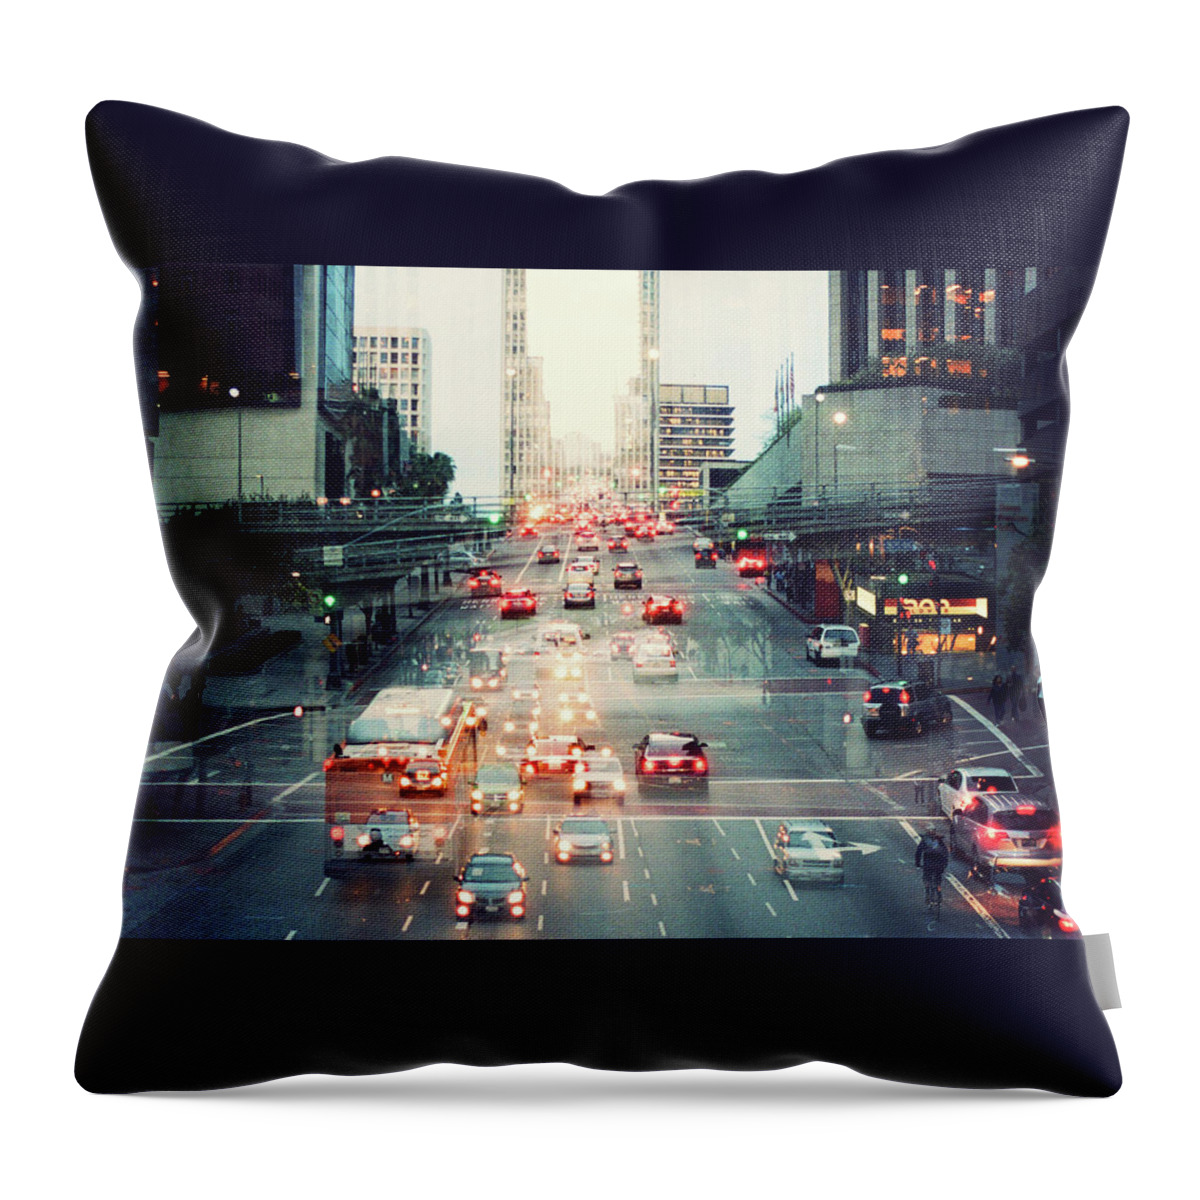 Built Structure Throw Pillow featuring the photograph City by By Jimmay Bones